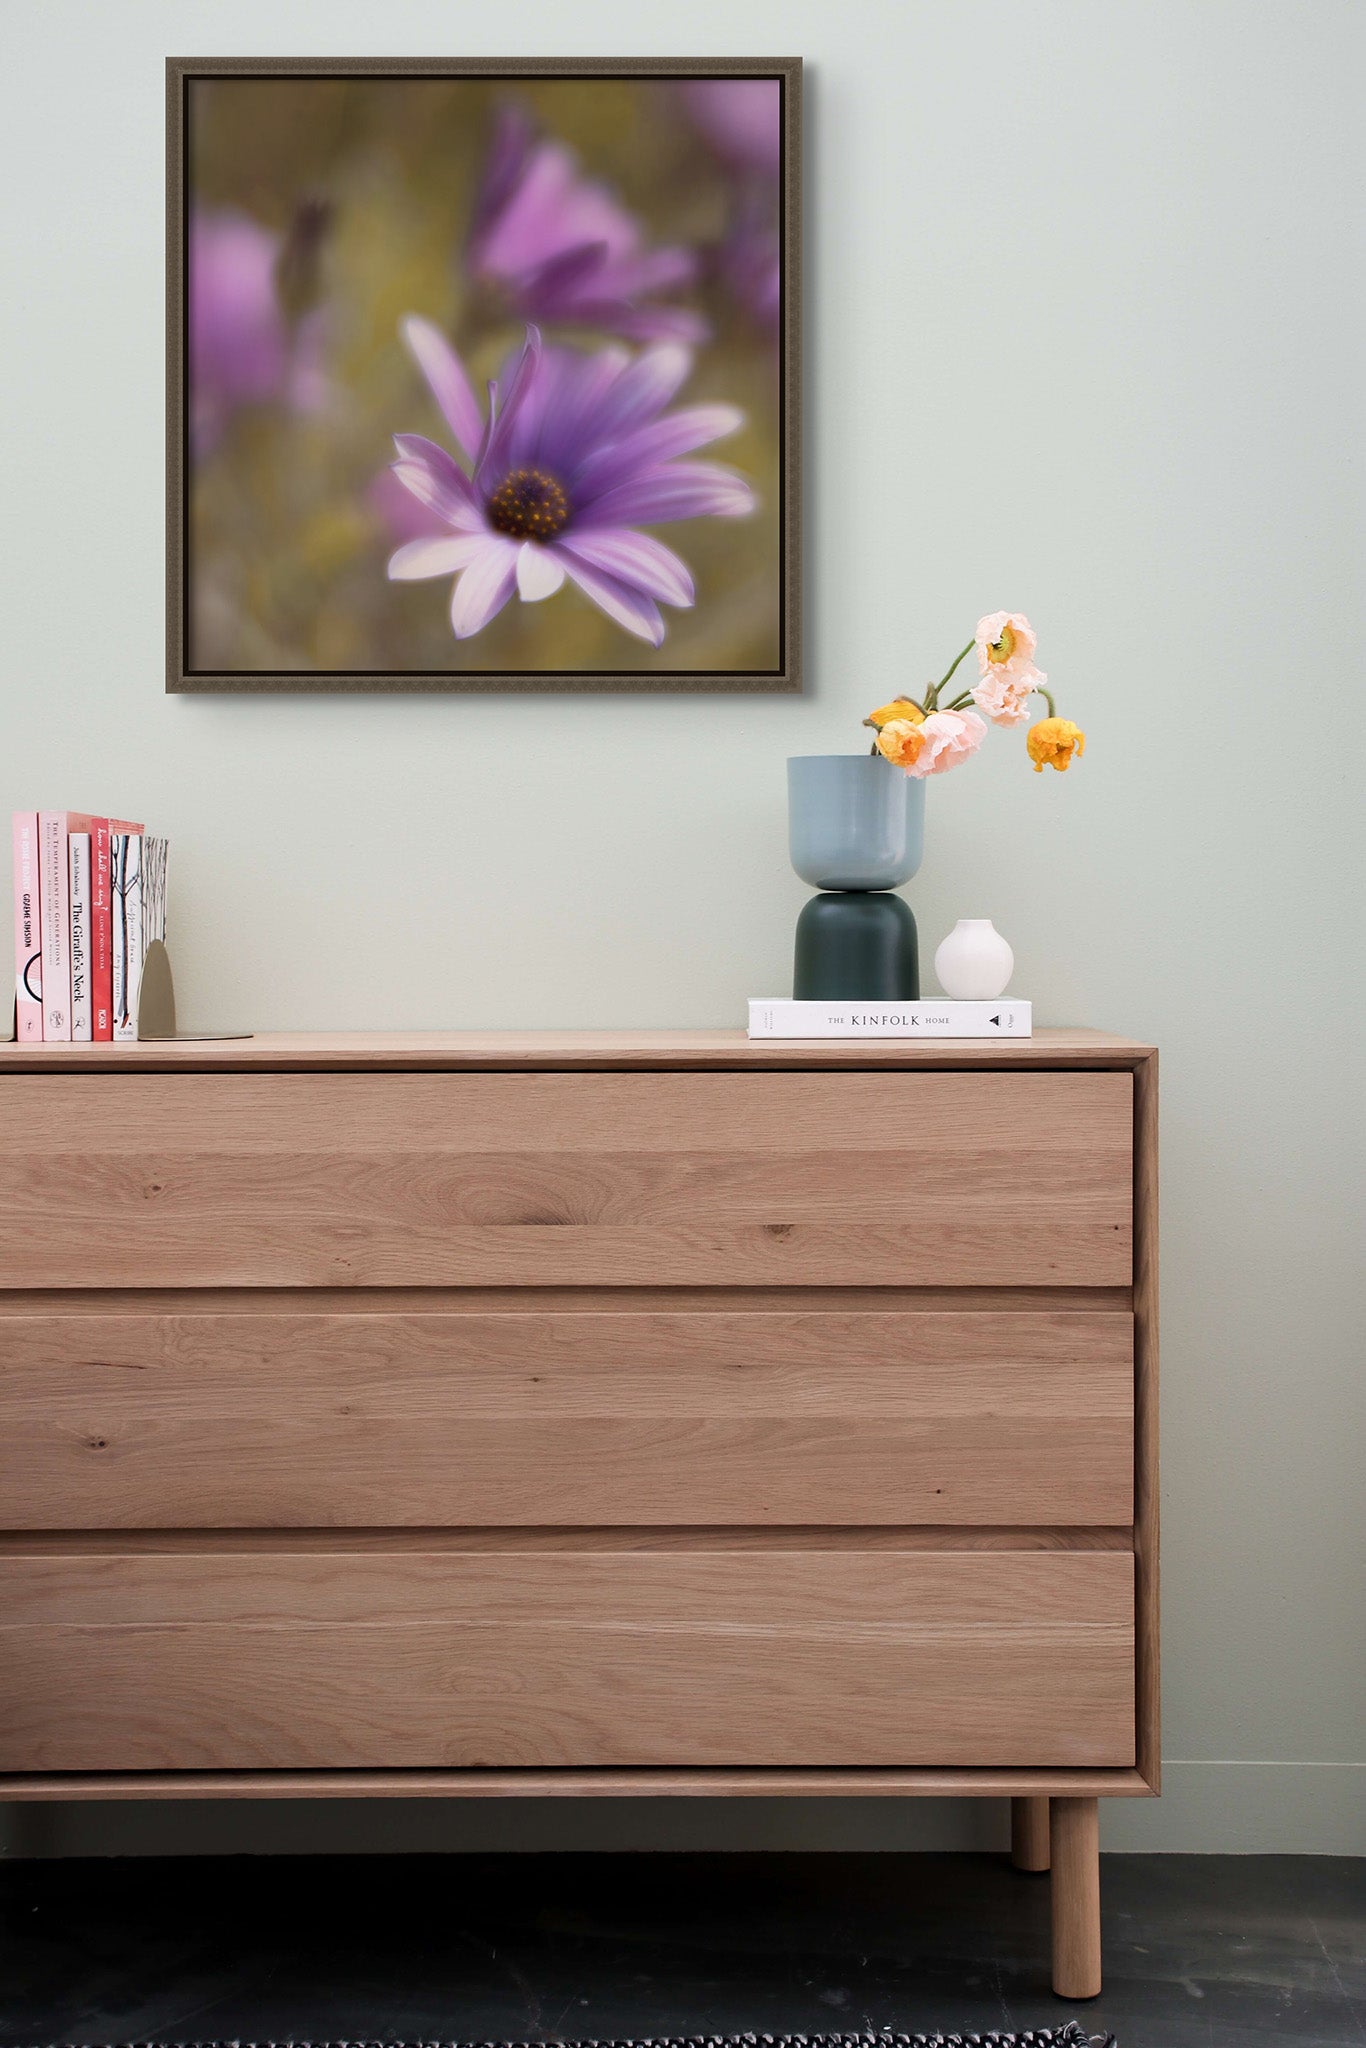 Picture hanging on a wall. There is also a dresser with flowers in a vase. The picture is a fine art photograph of a purple daisy blowing the in the wind. The photograph is by Cameron Dreaux. 